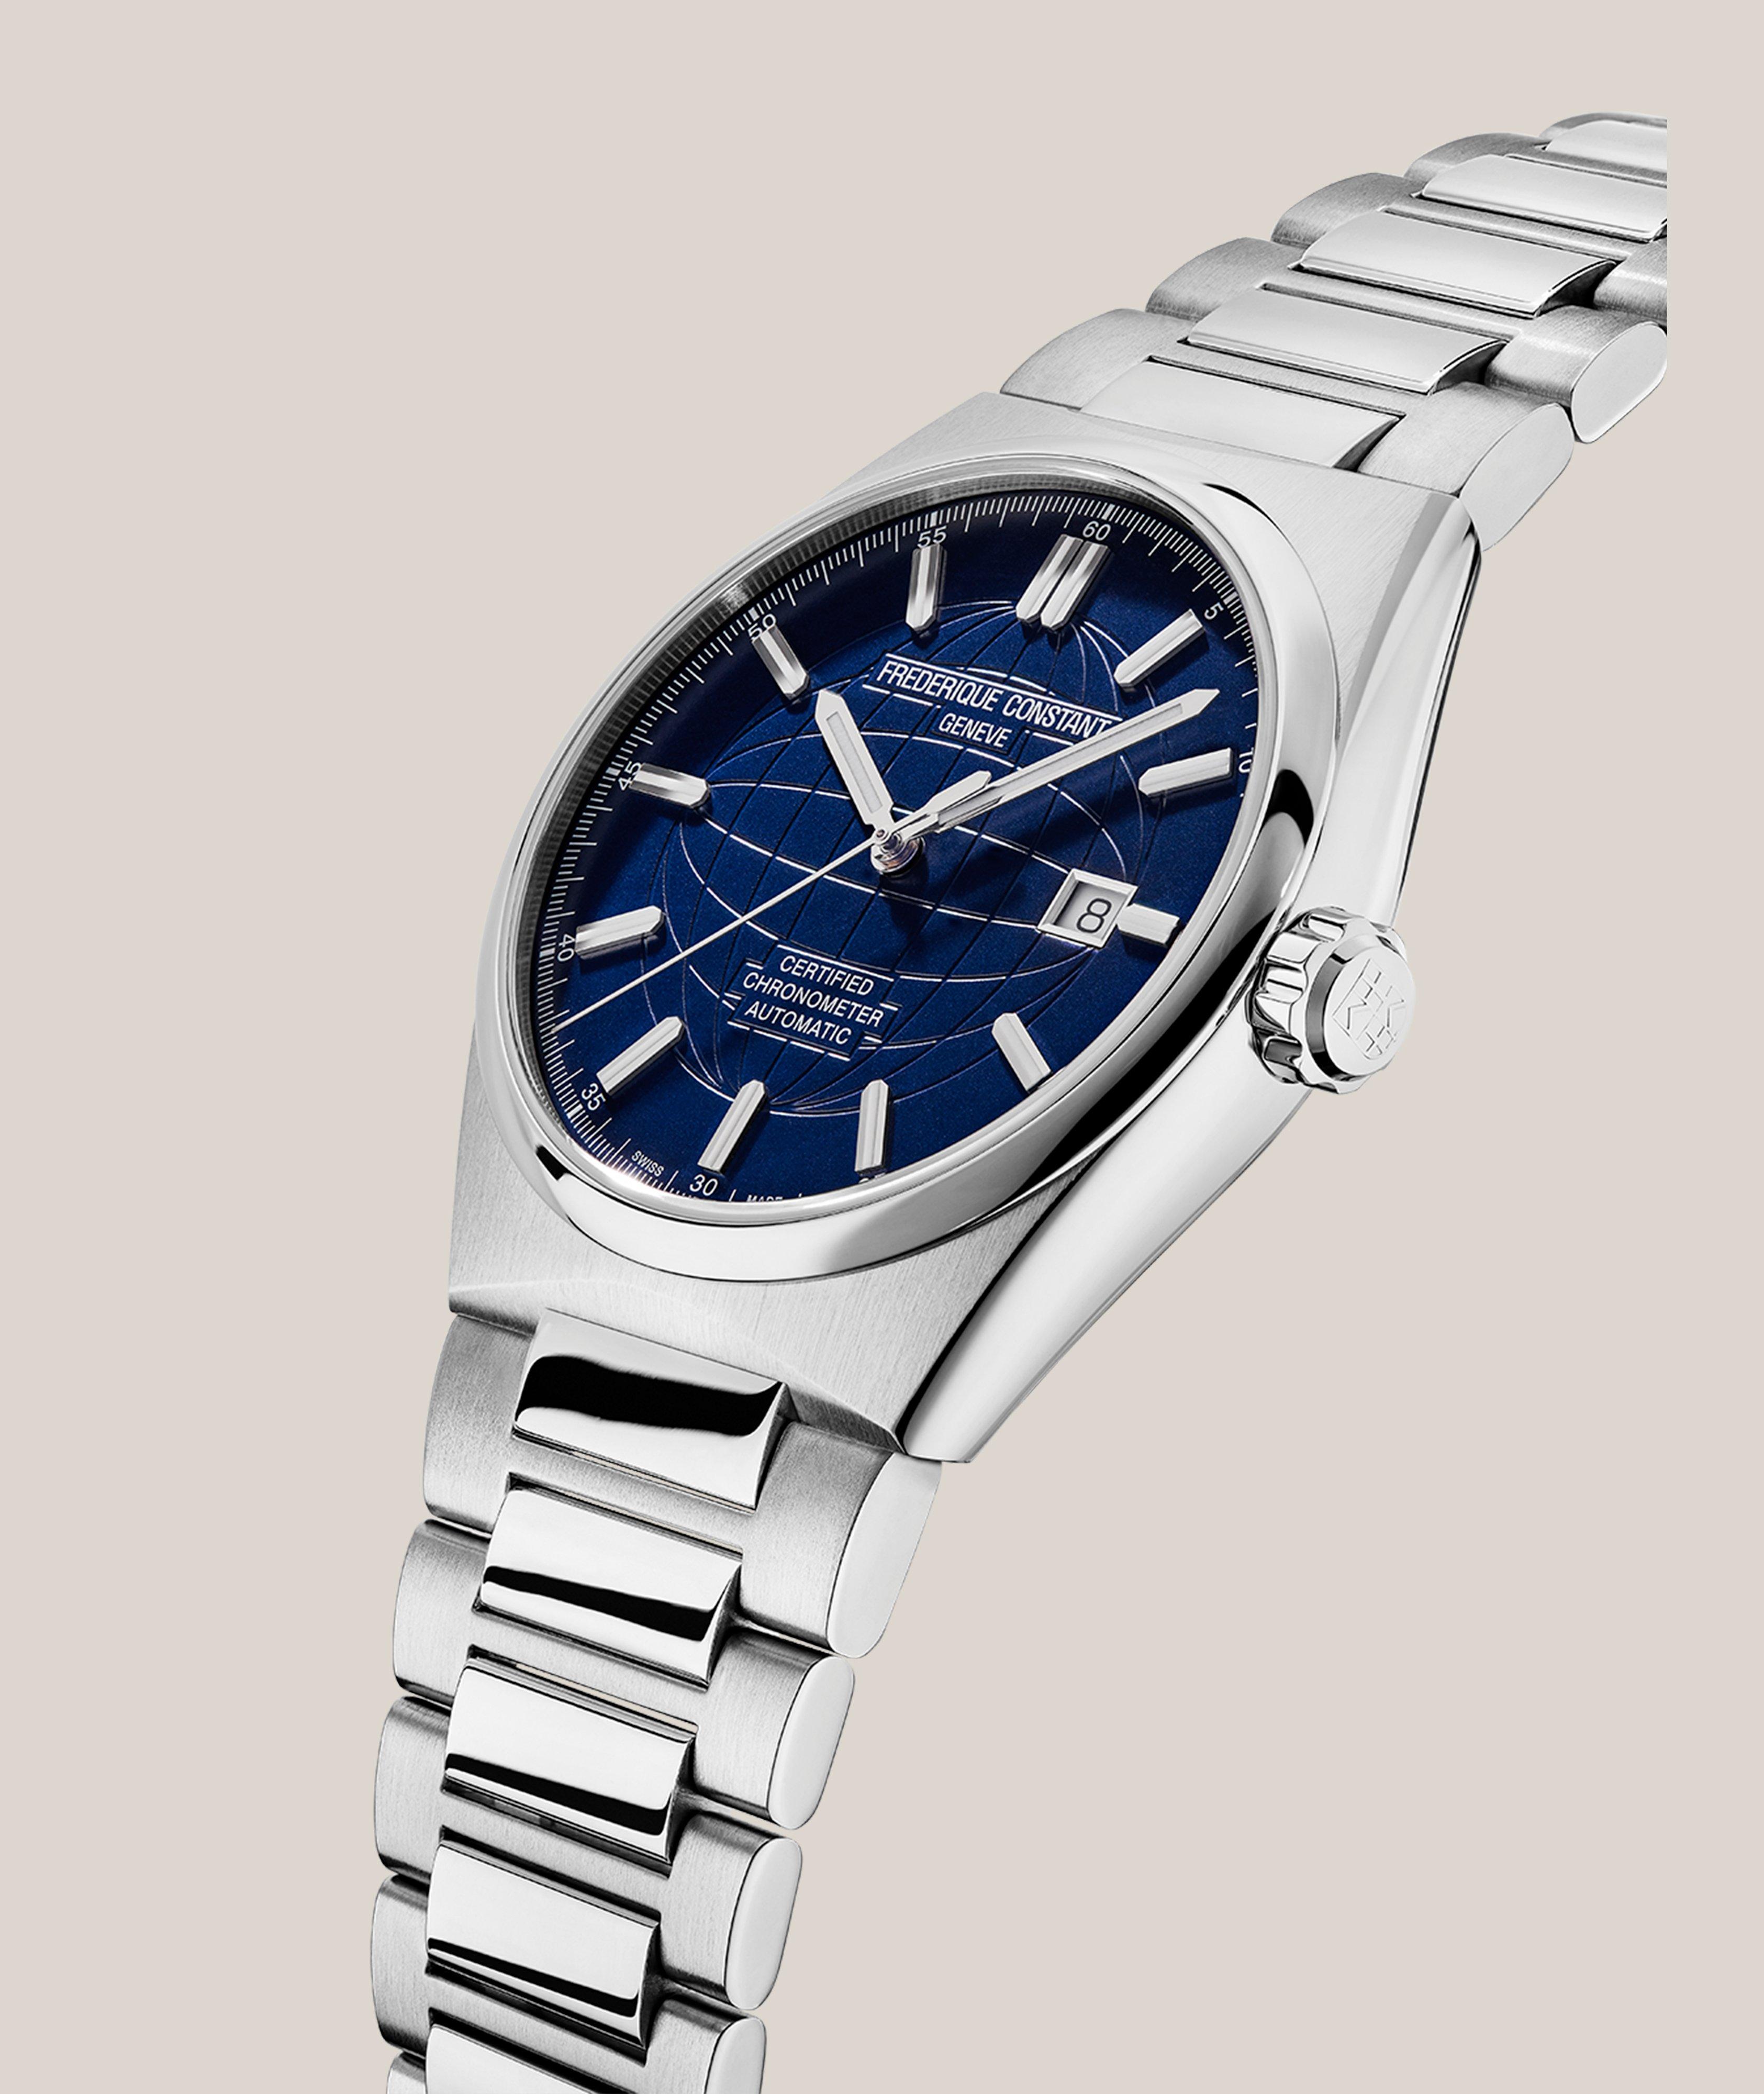 Highlife Automatic Watch image 1